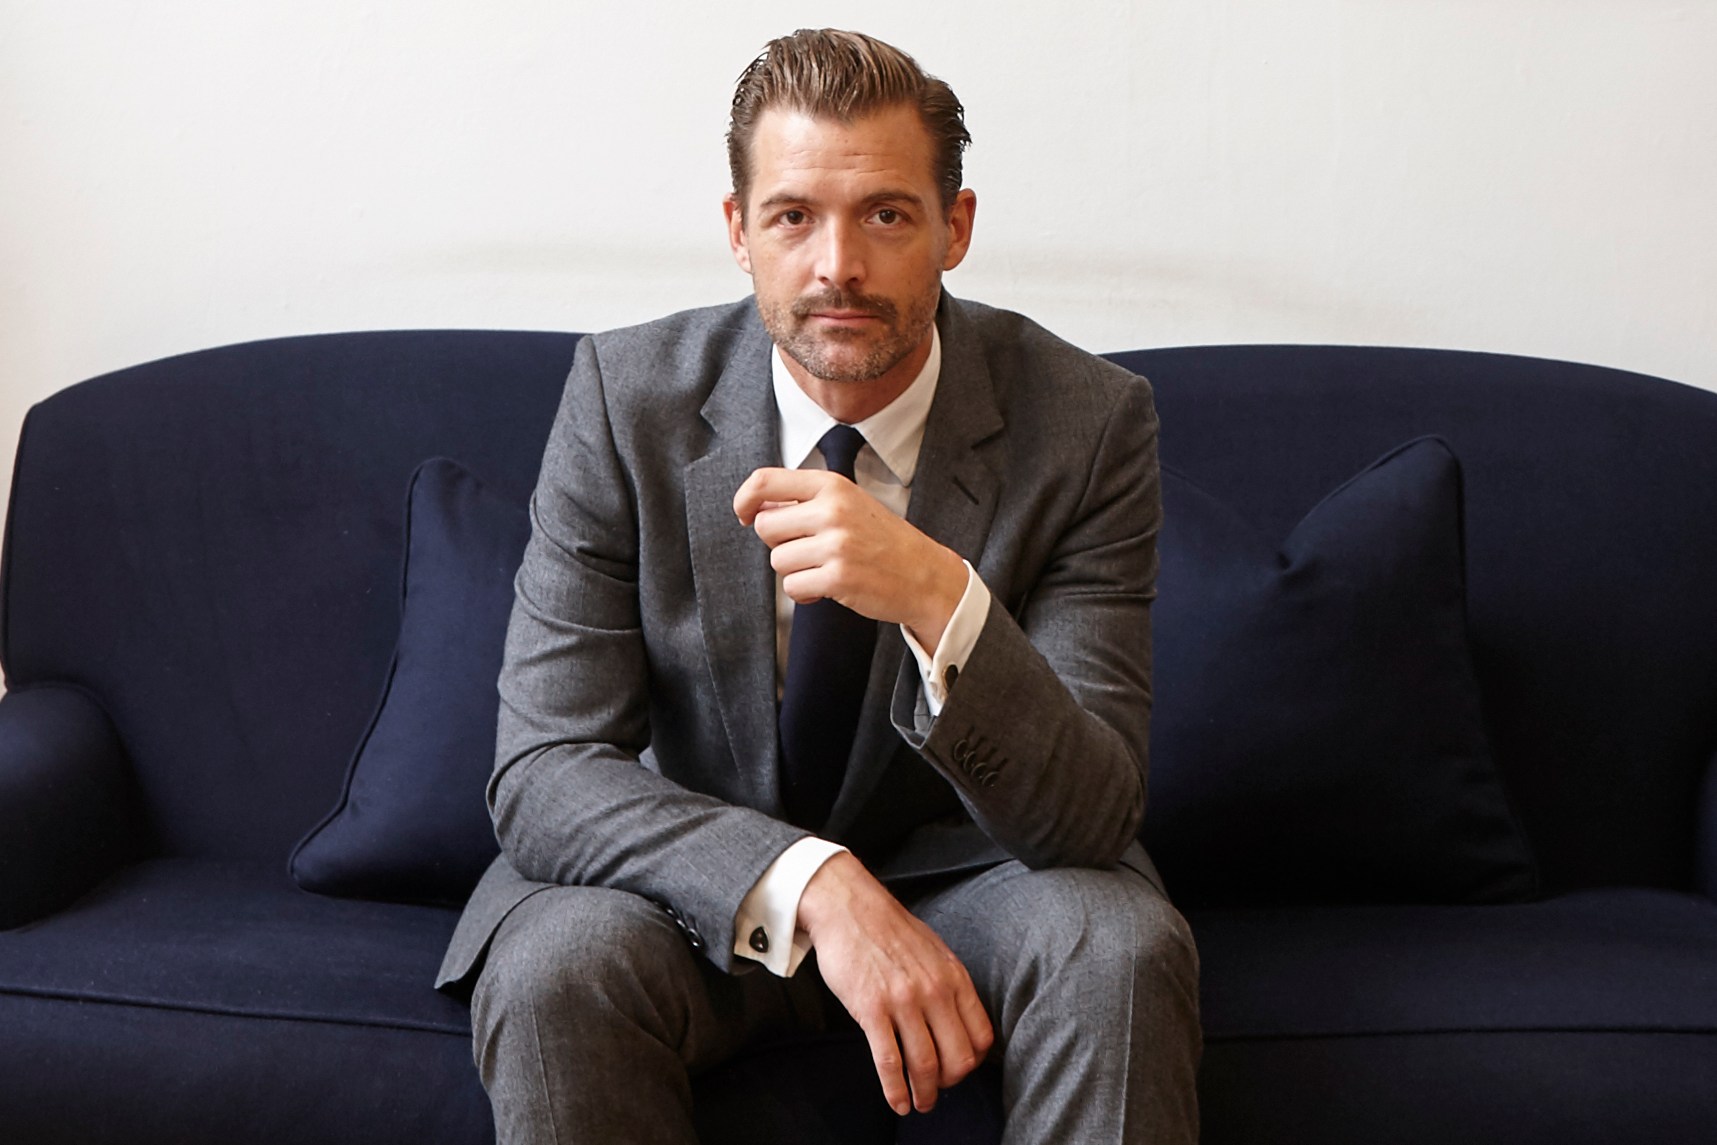 Patrick Grant’s new rules for wearing the modern suit